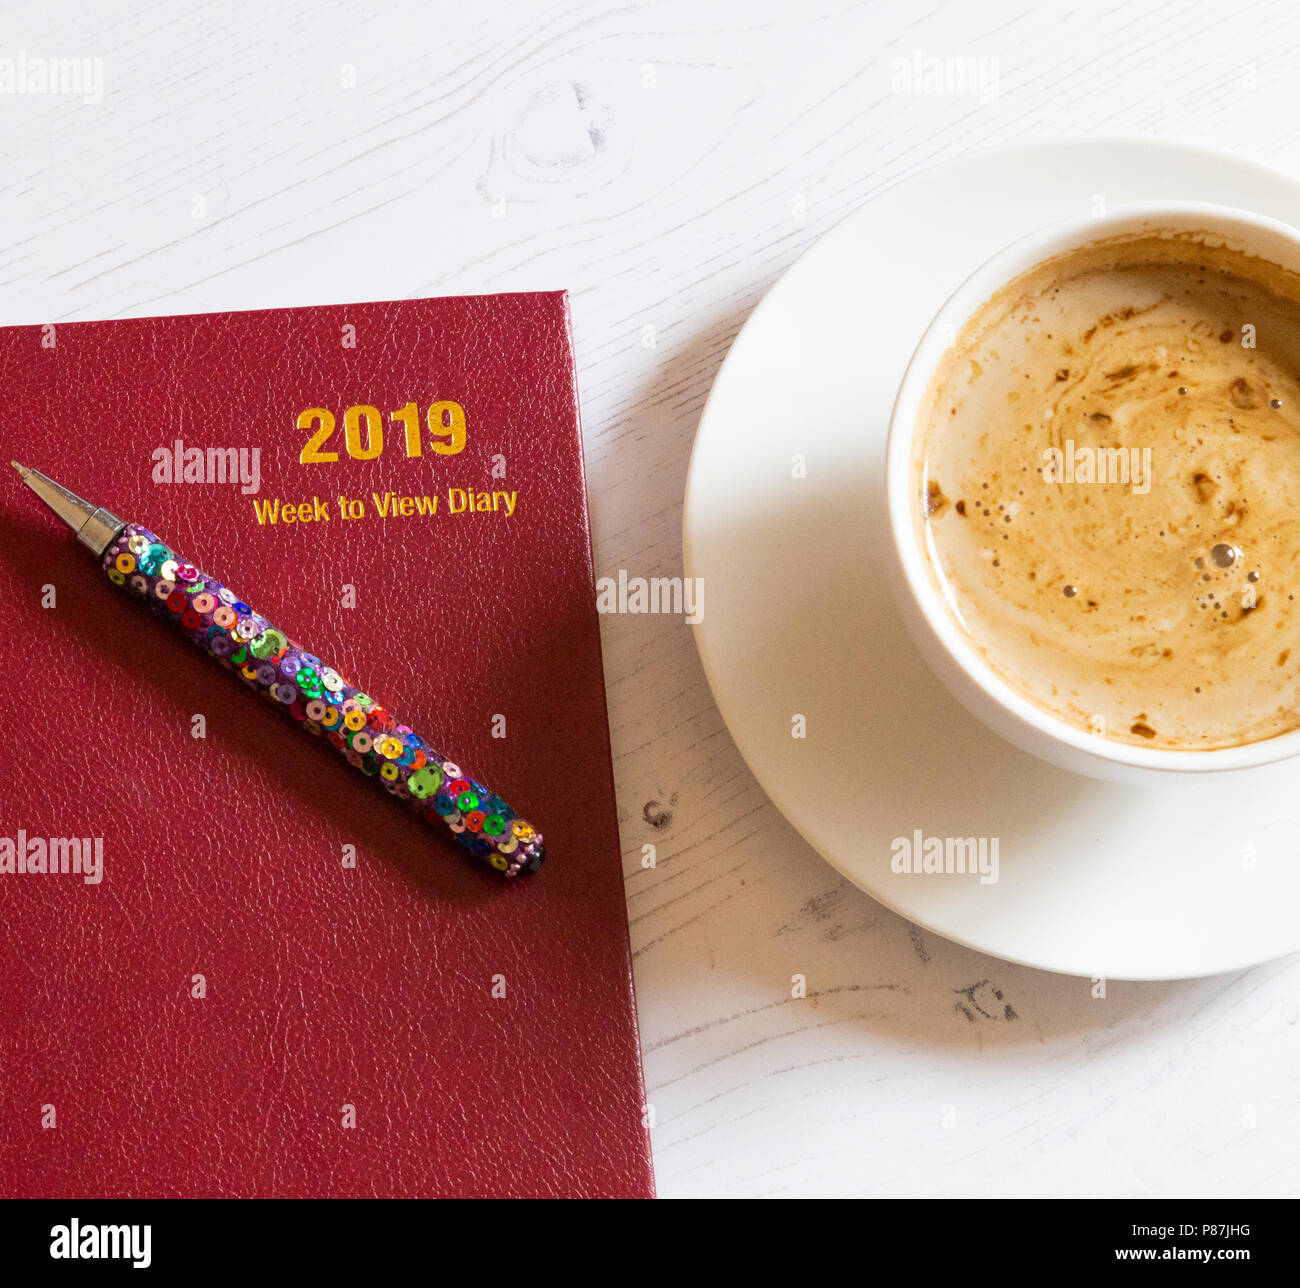 A 2019 desk dairy with a cup of coffee alongside. Stock Photo